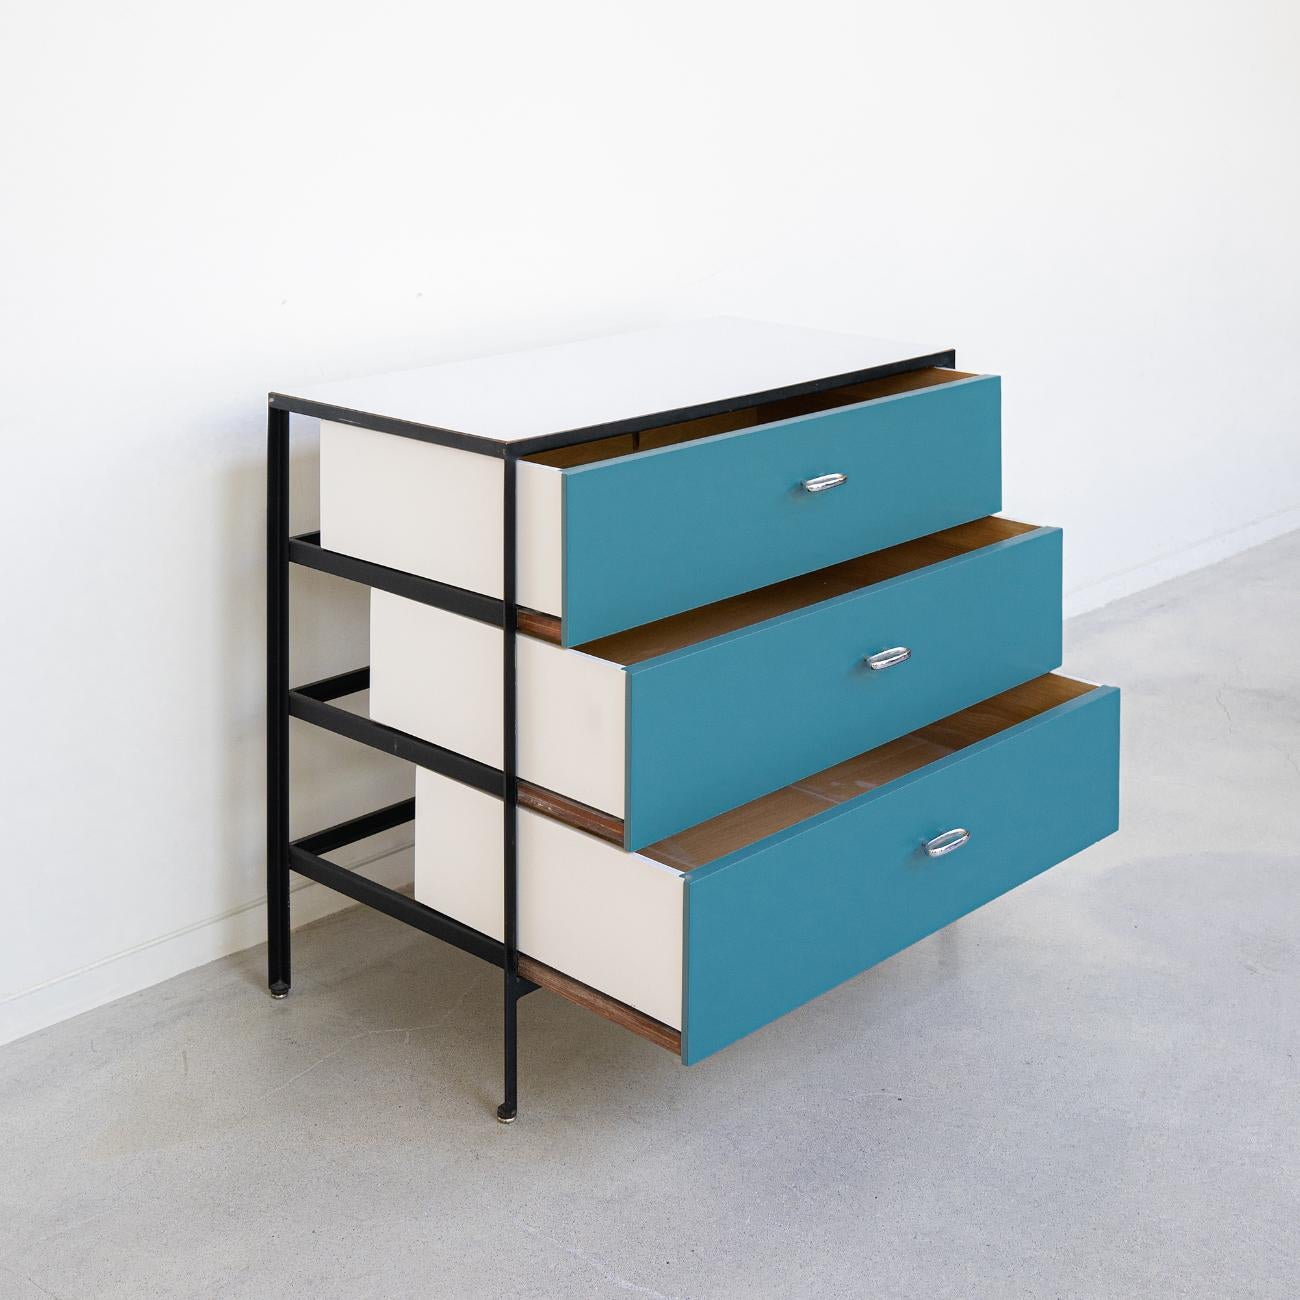 This is a sold dresser designed by George Nelson Associates for Herman Miller dating back to the 1950s. It has three drawers suspended in a steel frame. This unusual design reveals the space behind the drawers when they are opened.

The drawer faces